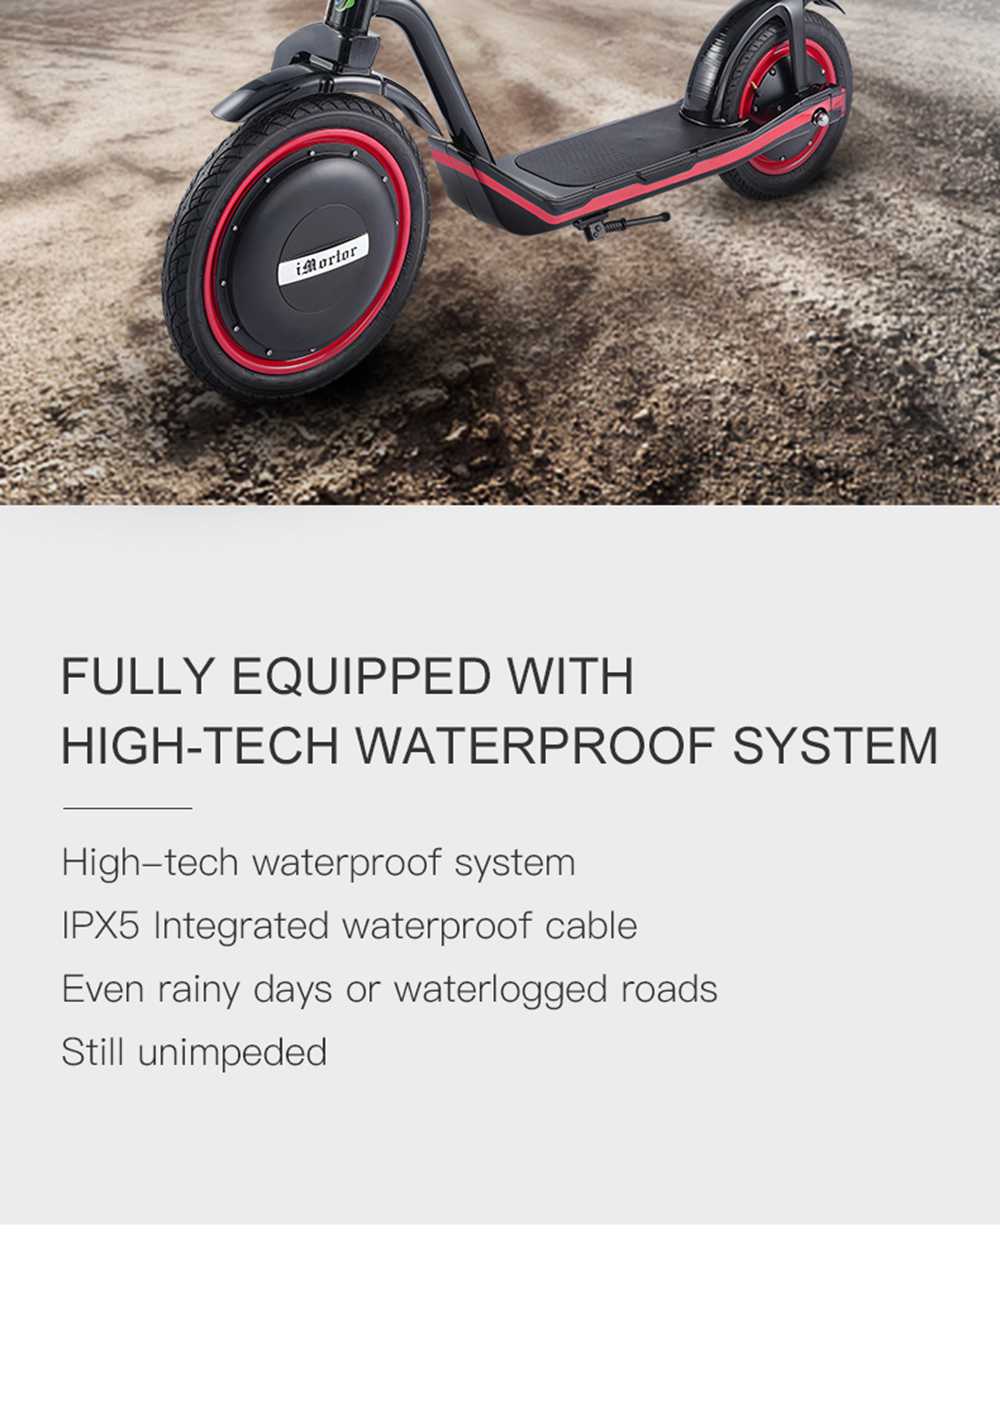 iMortor C1 Foldable Off-road Electric Scooter 350W Motor Max 30km/h 9.6Ah Battery16 Inch Pneumatic Tire - RED